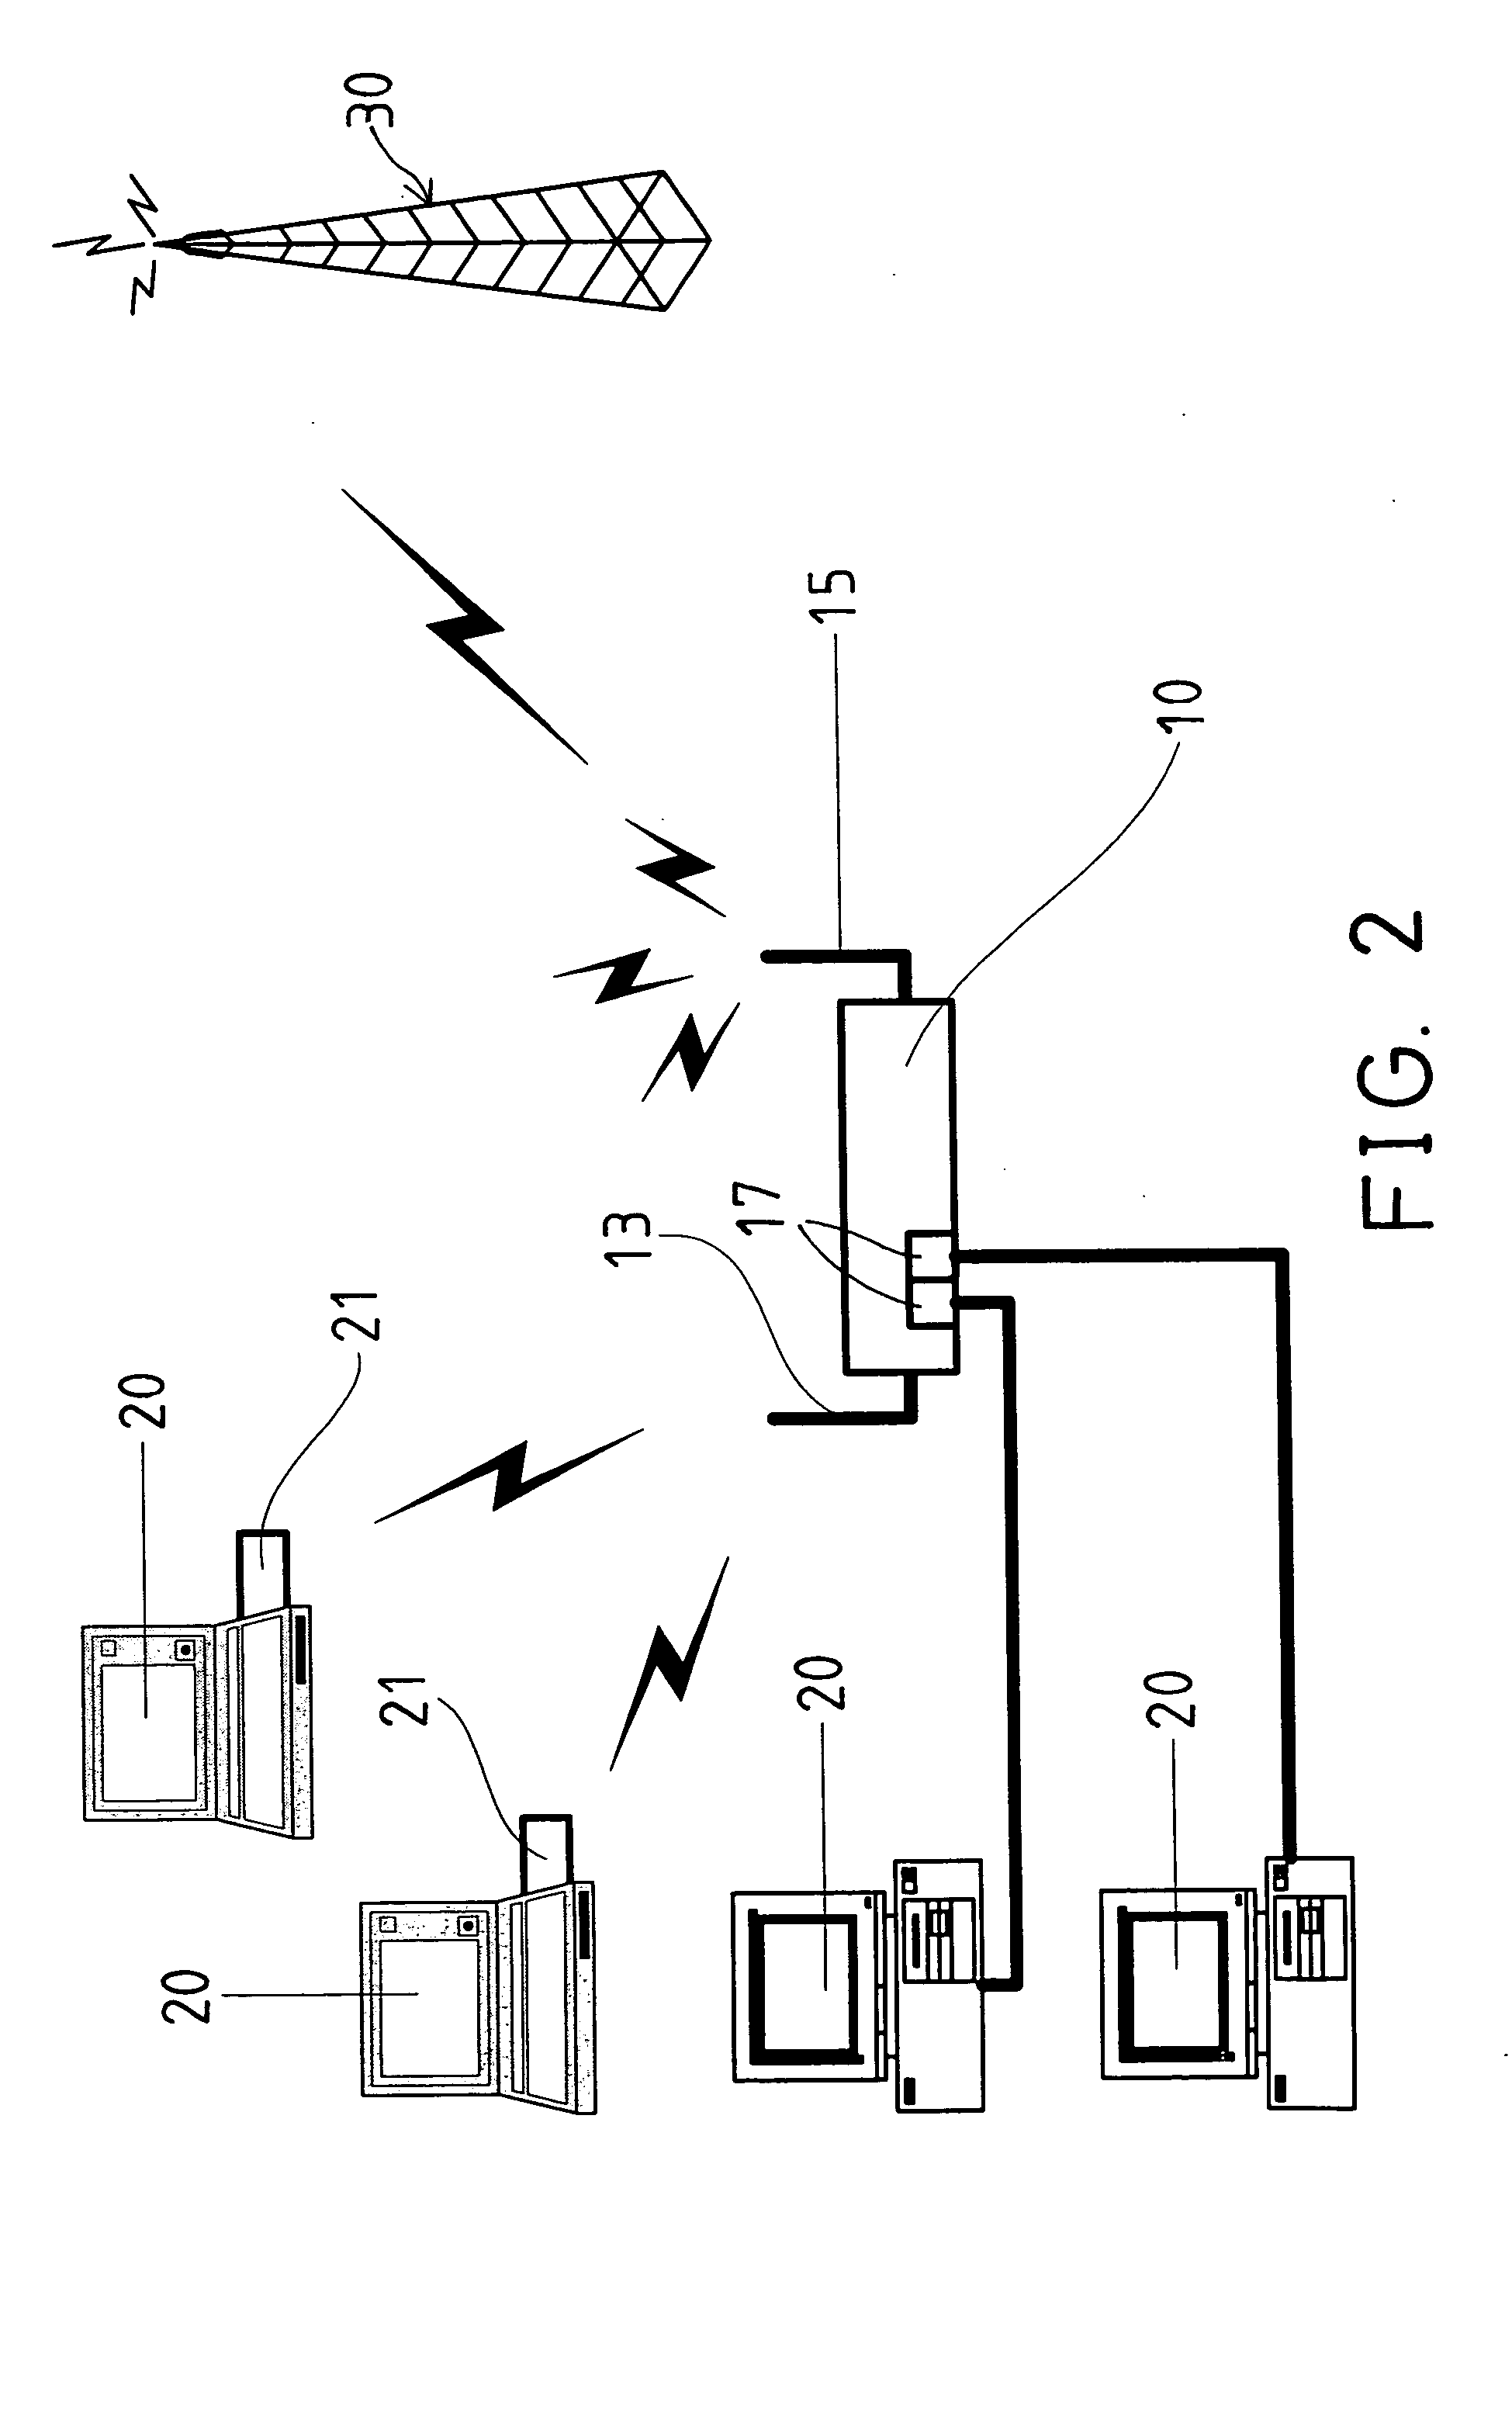 Wireless router device for coupling WCDMA system